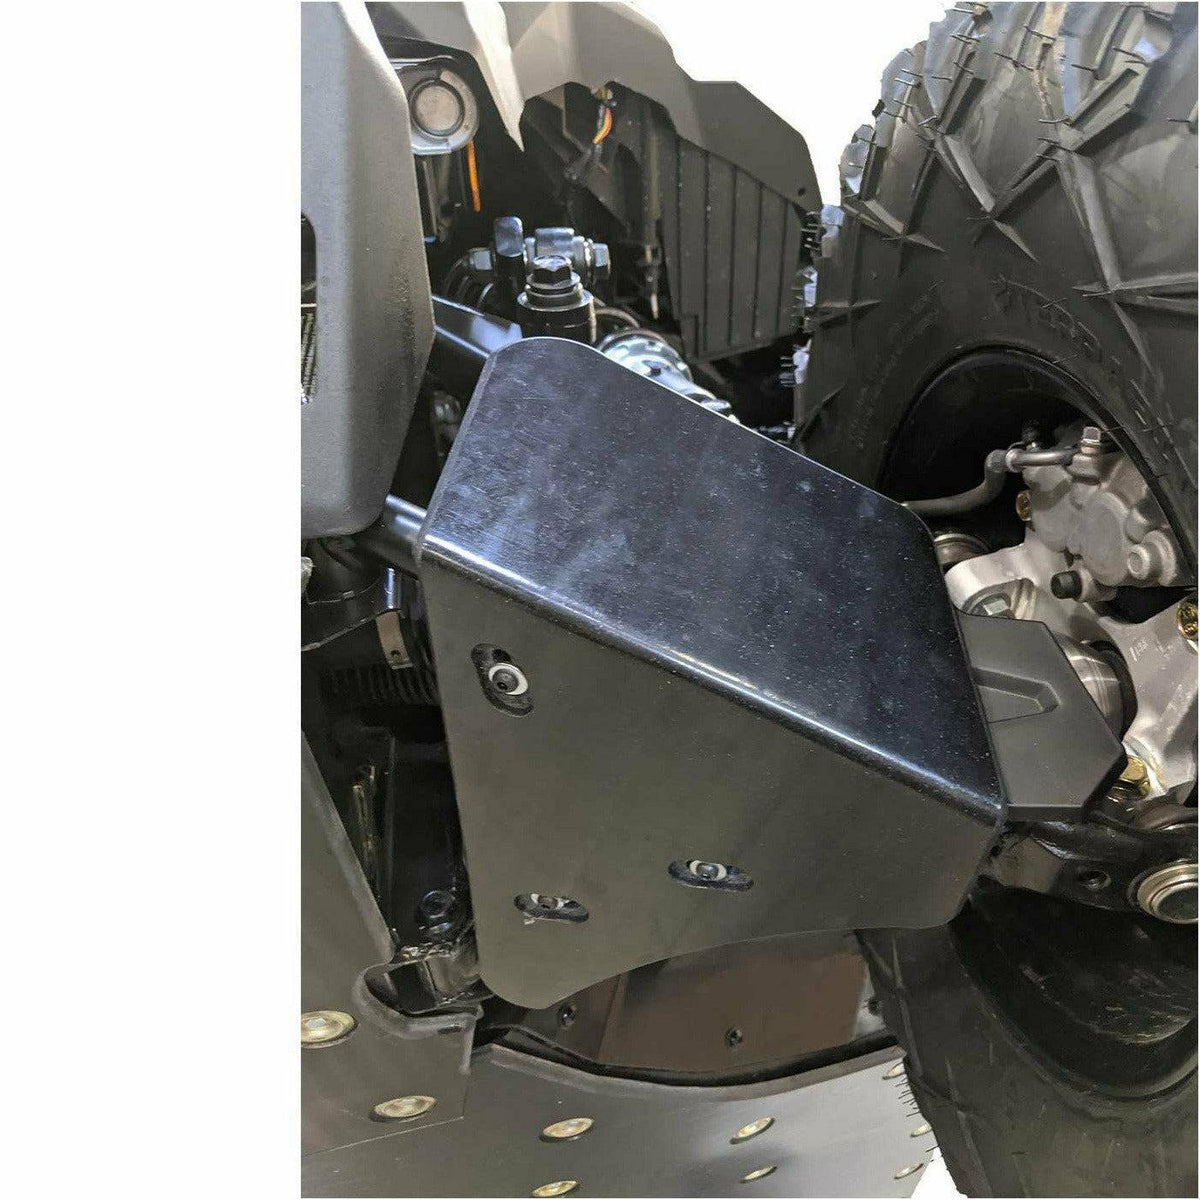 SSS Off-Road UHMW Arm Guards for Can Am Maverick Trail